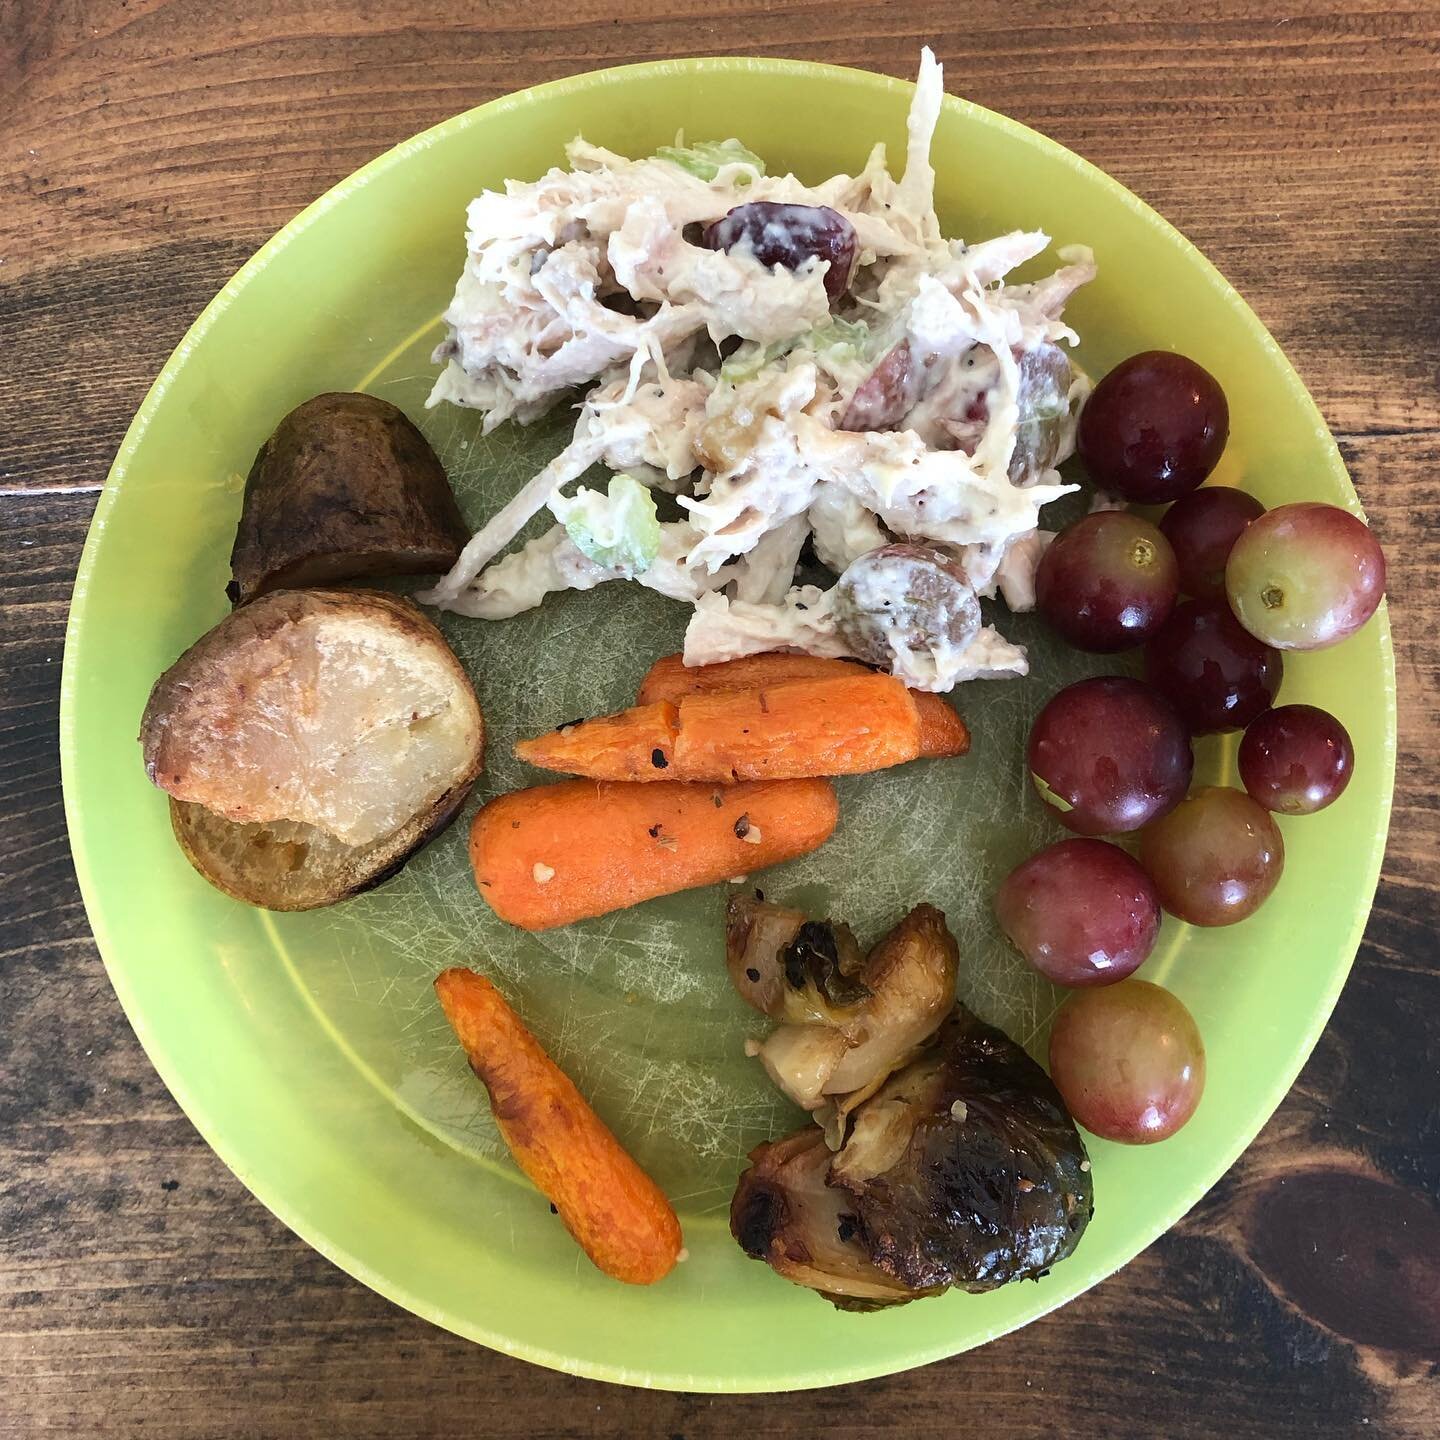 It&rsquo;s been a few weeks since we had chicken salad as an option for lunch, and I&rsquo;m reminded how much I love it! 1, it&rsquo;s super tasty, and 2, it&rsquo;s convenient as heck! 
- chicken salad
- roasted carrots and brussell sprouts 
- grap